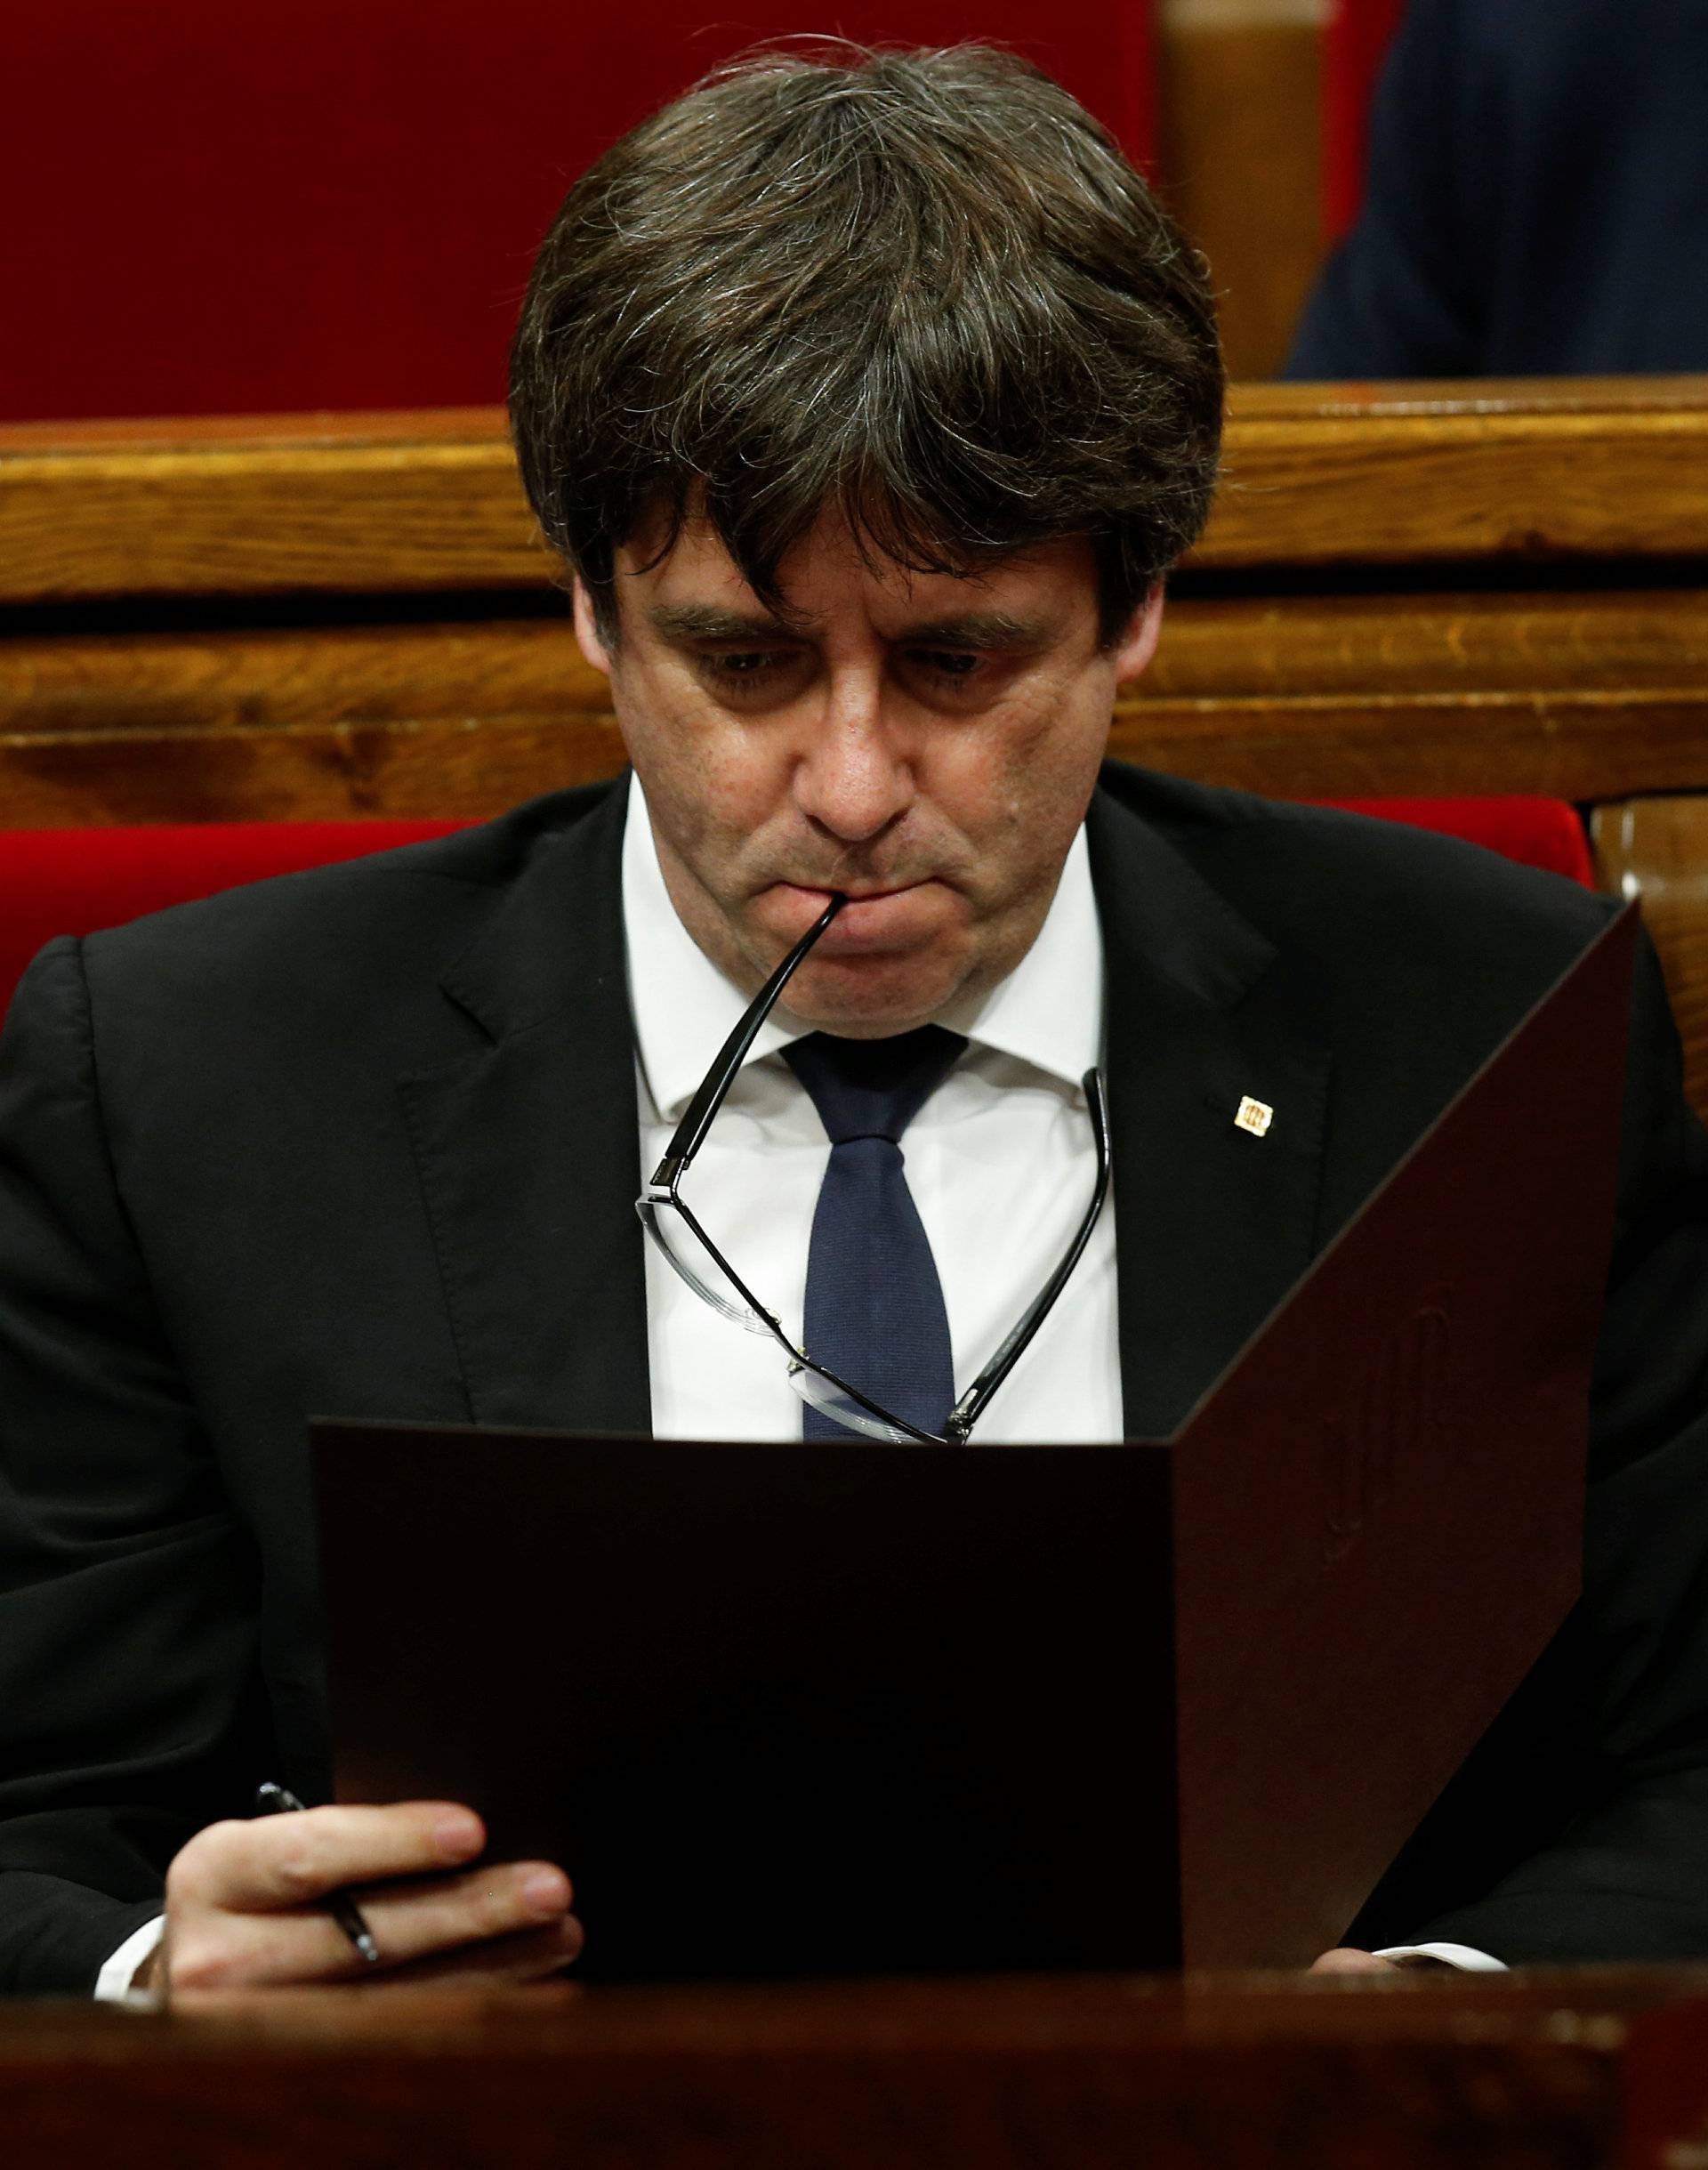 Catalan President Carles Puigdemont reviews his notes at the start of a plenary session at the Catalonian regional parliament in Barcelona